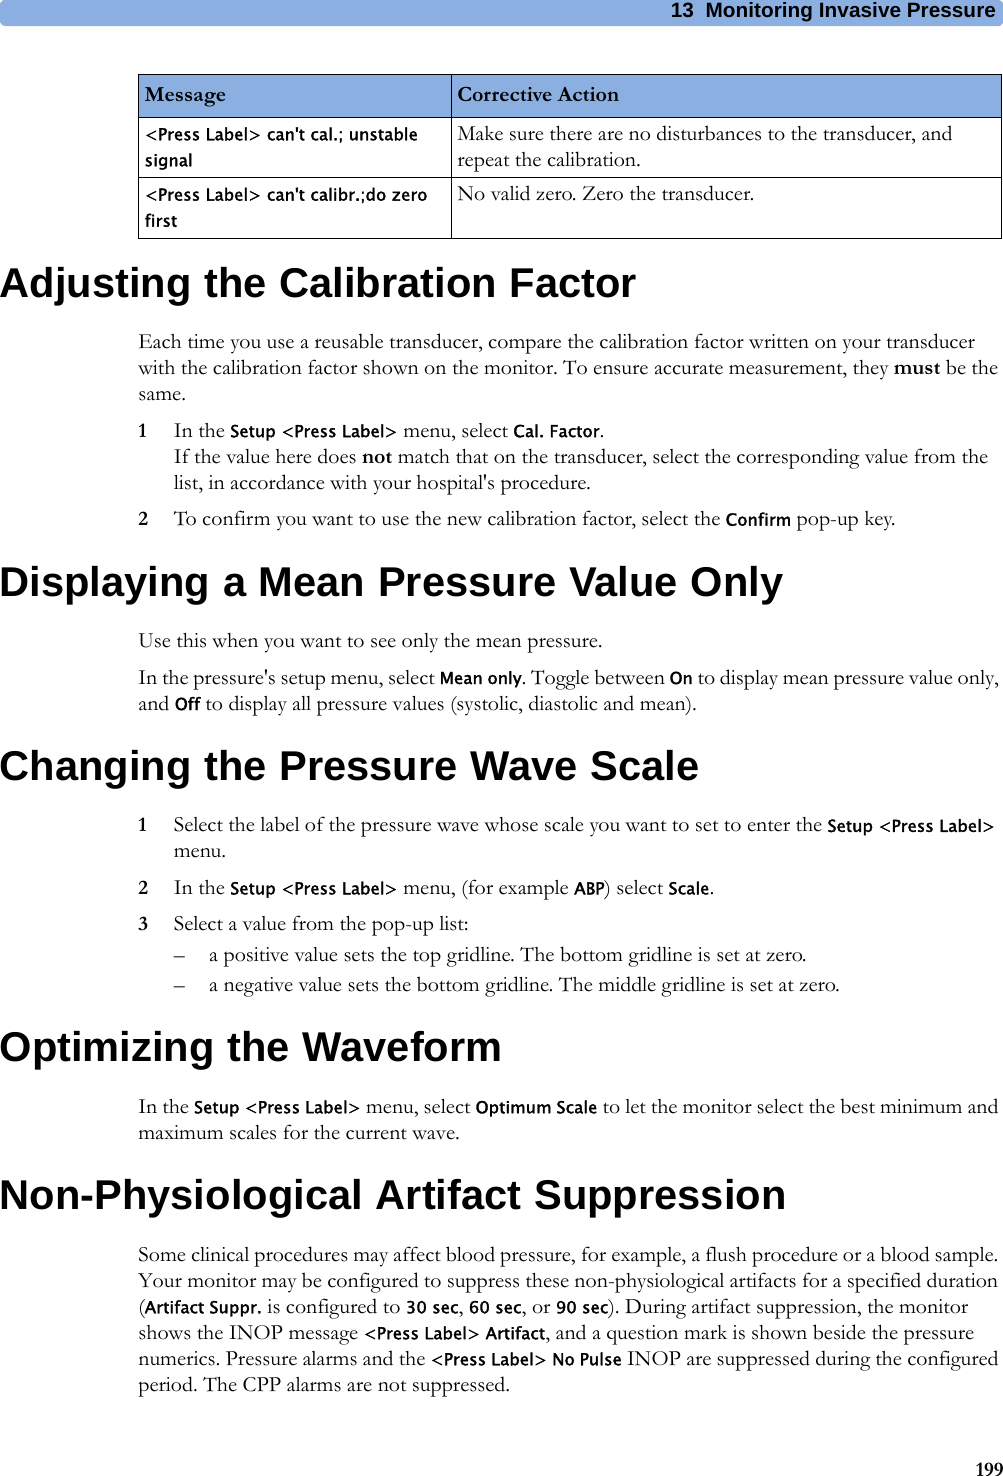 13 Monitoring Invasive Pressure199Adjusting the Calibration FactorEach time you use a reusable transducer, compare the calibration factor written on your transducer with the calibration factor shown on the monitor. To ensure accurate measurement, they must be the same.1In the Setup &lt;Press Label&gt; menu, select Cal. Factor.If the value here does not match that on the transducer, select the corresponding value from the list, in accordance with your hospital&apos;s procedure.2To confirm you want to use the new calibration factor, select the Confirm pop-up key.Displaying a Mean Pressure Value OnlyUse this when you want to see only the mean pressure.In the pressure&apos;s setup menu, select Mean only. Toggle between On to display mean pressure value only, and Off to display all pressure values (systolic, diastolic and mean).Changing the Pressure Wave Scale1Select the label of the pressure wave whose scale you want to set to enter the Setup &lt;Press Label&gt; menu.2In the Setup &lt;Press Label&gt; menu, (for example ABP) select Scale.3Select a value from the pop-up list:– a positive value sets the top gridline. The bottom gridline is set at zero.– a negative value sets the bottom gridline. The middle gridline is set at zero.Optimizing the WaveformIn the Setup &lt;Press Label&gt; menu, select Optimum Scale to let the monitor select the best minimum and maximum scales for the current wave.Non-Physiological Artifact SuppressionSome clinical procedures may affect blood pressure, for example, a flush procedure or a blood sample. Your monitor may be configured to suppress these non-physiological artifacts for a specified duration (Artifact Suppr. is configured to 30 sec, 60 sec, or 90 sec). During artifact suppression, the monitor shows the INOP message &lt;Press Label&gt; Artifact, and a question mark is shown beside the pressure numerics. Pressure alarms and the &lt;Press Label&gt; No Pulse INOP are suppressed during the configured period. The CPP alarms are not suppressed.&lt;Press Label&gt; can&apos;t cal.; unstable signalMake sure there are no disturbances to the transducer, and repeat the calibration.&lt;Press Label&gt; can&apos;t calibr.;do zero firstNo valid zero. Zero the transducer.Message Corrective Action